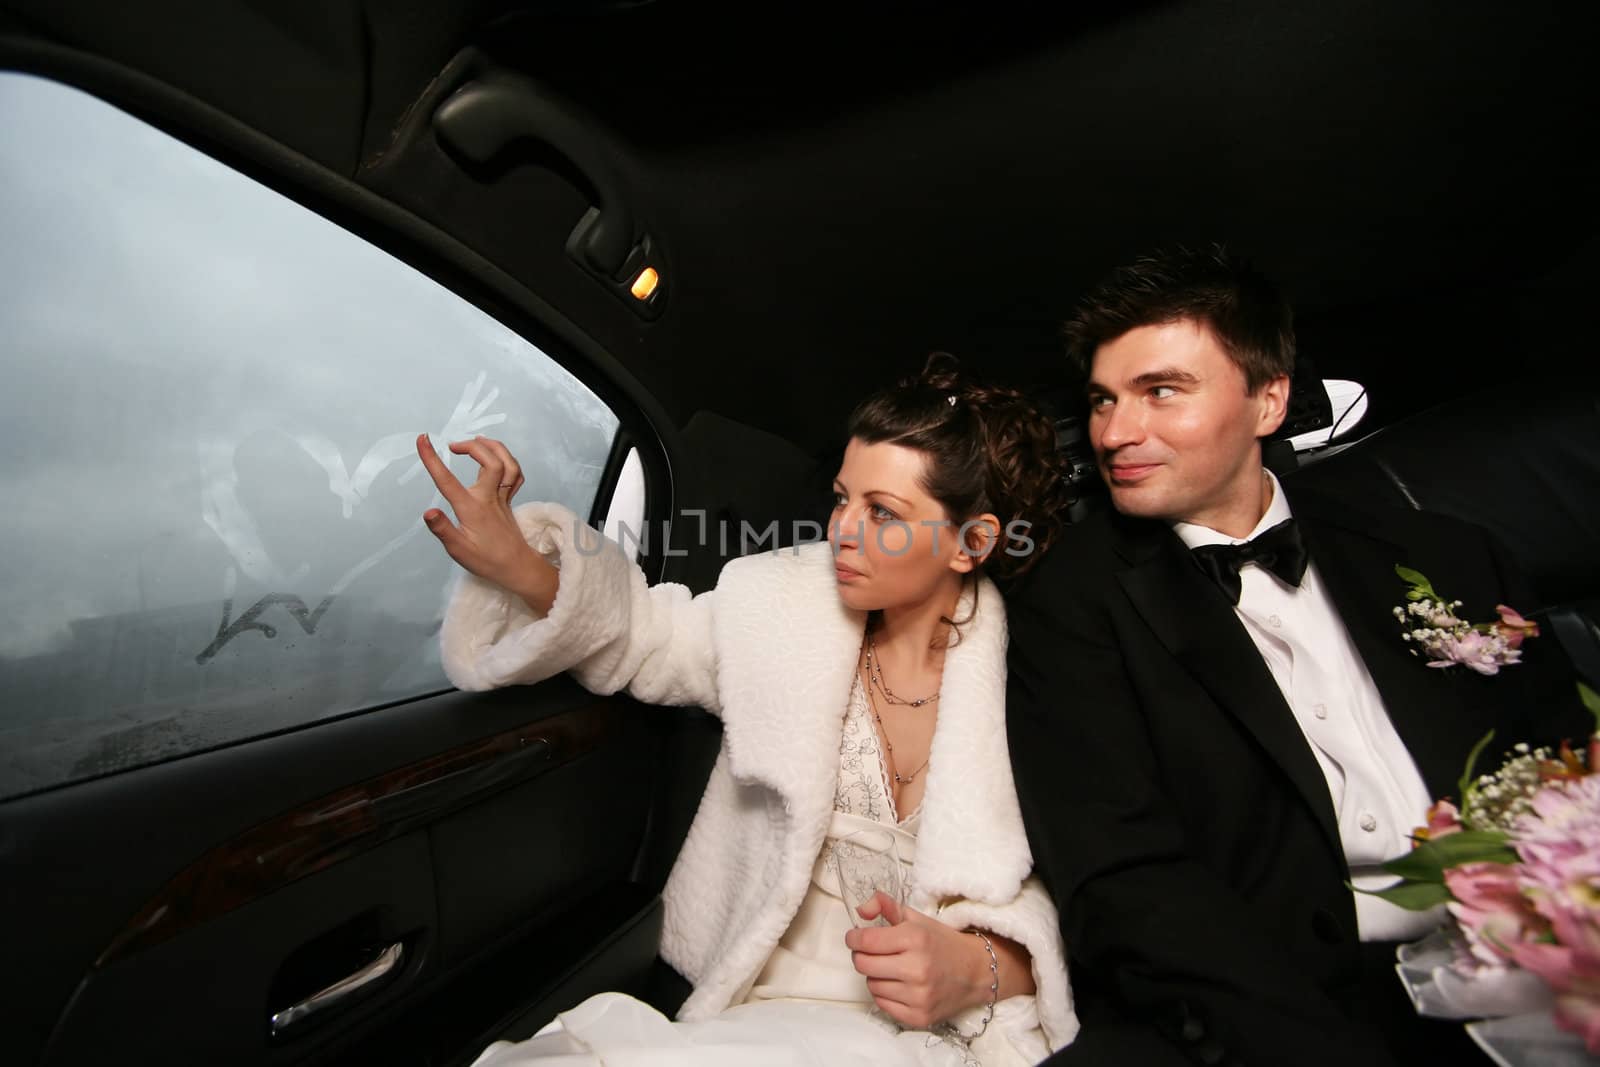 The bride and groom in automobile